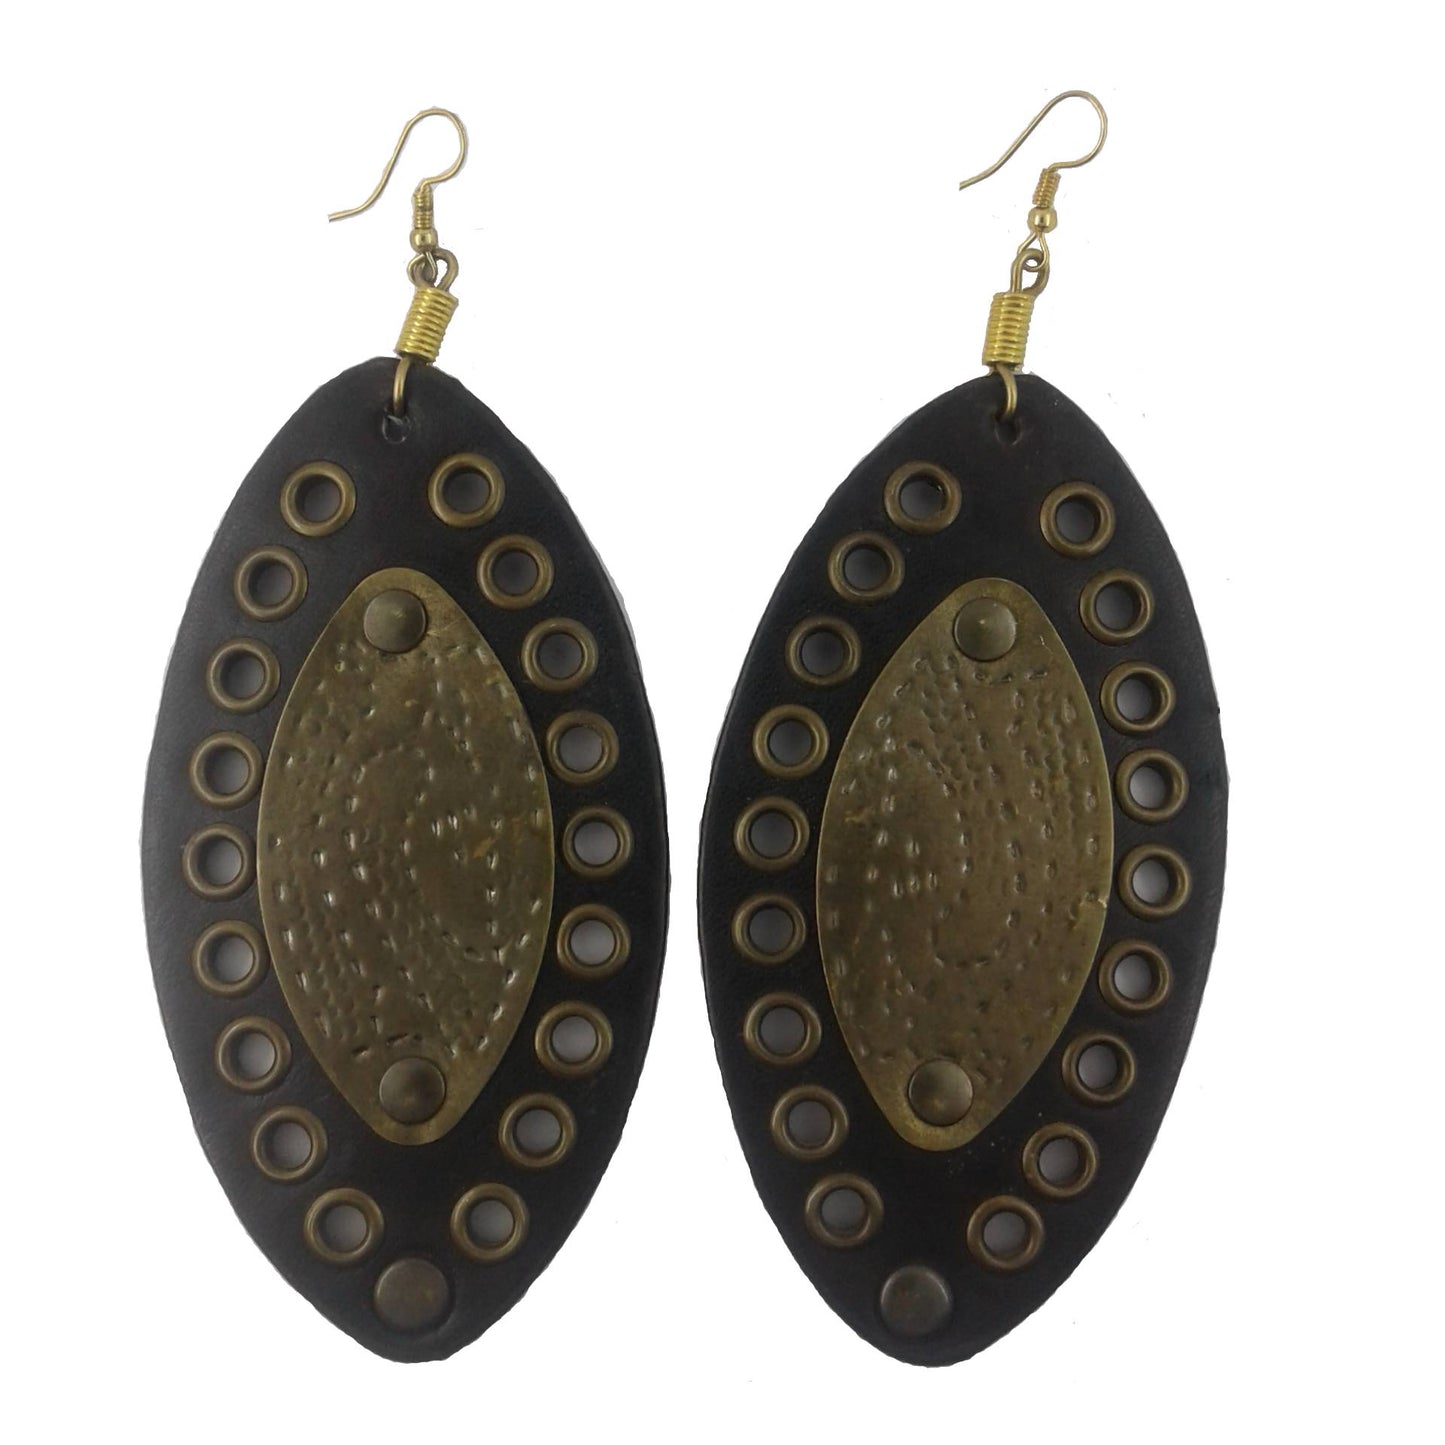 Leather and gold earrings